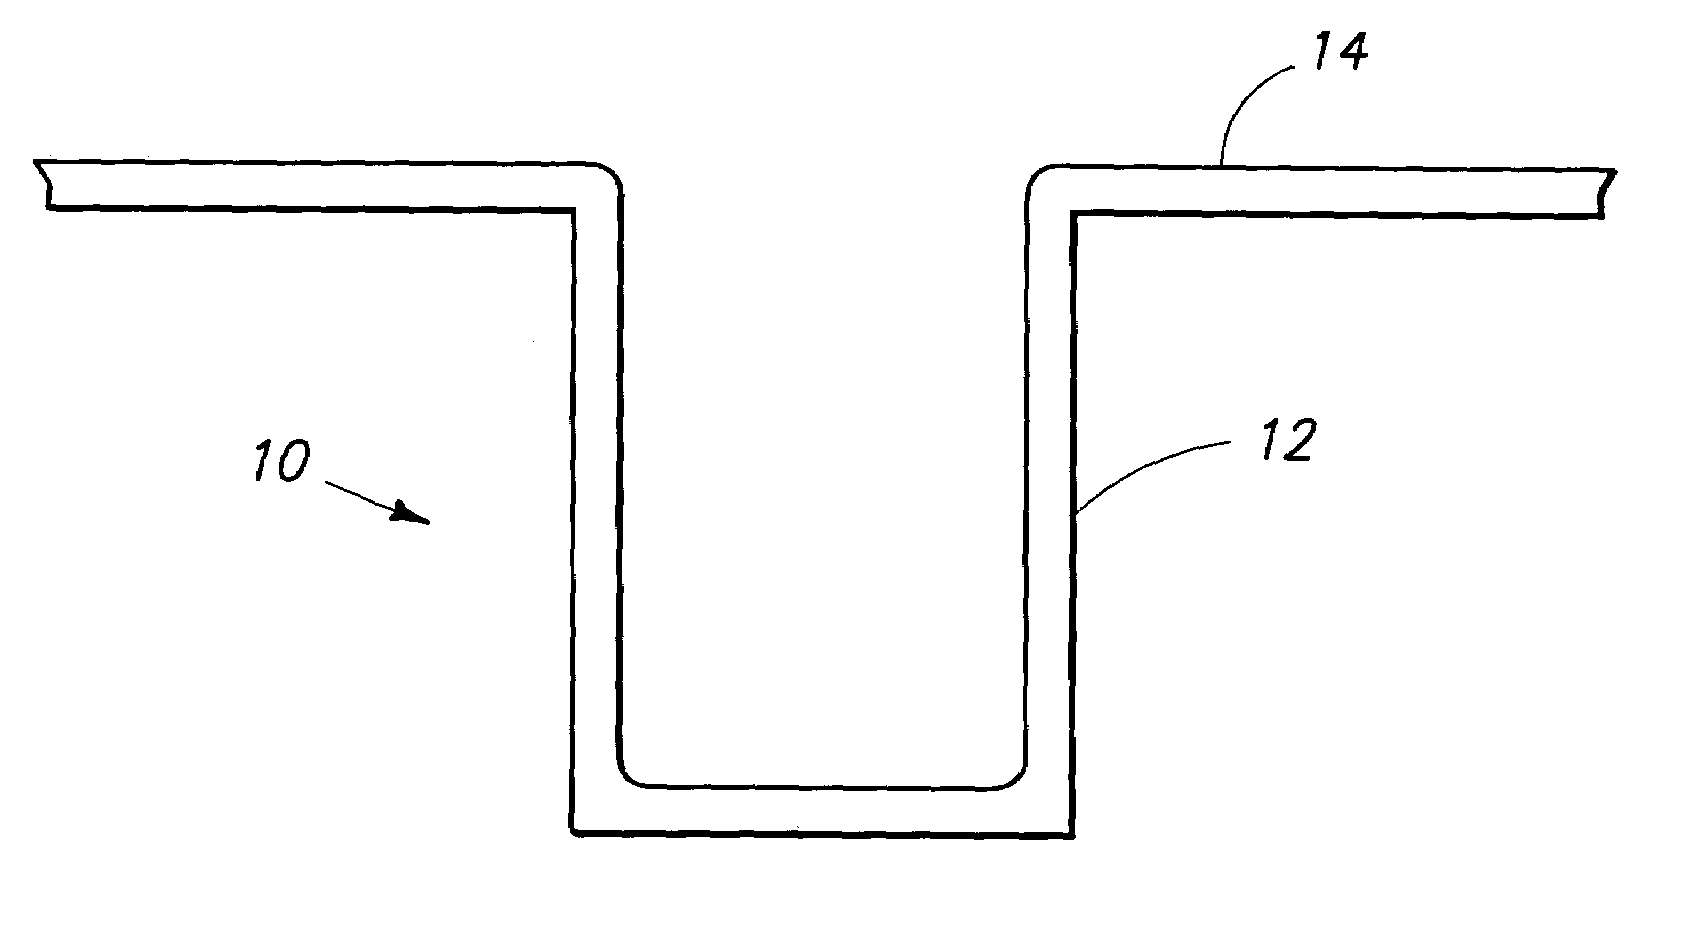 Semiconductor processing methods of chemical vapor depositing SiO2 on a substrate